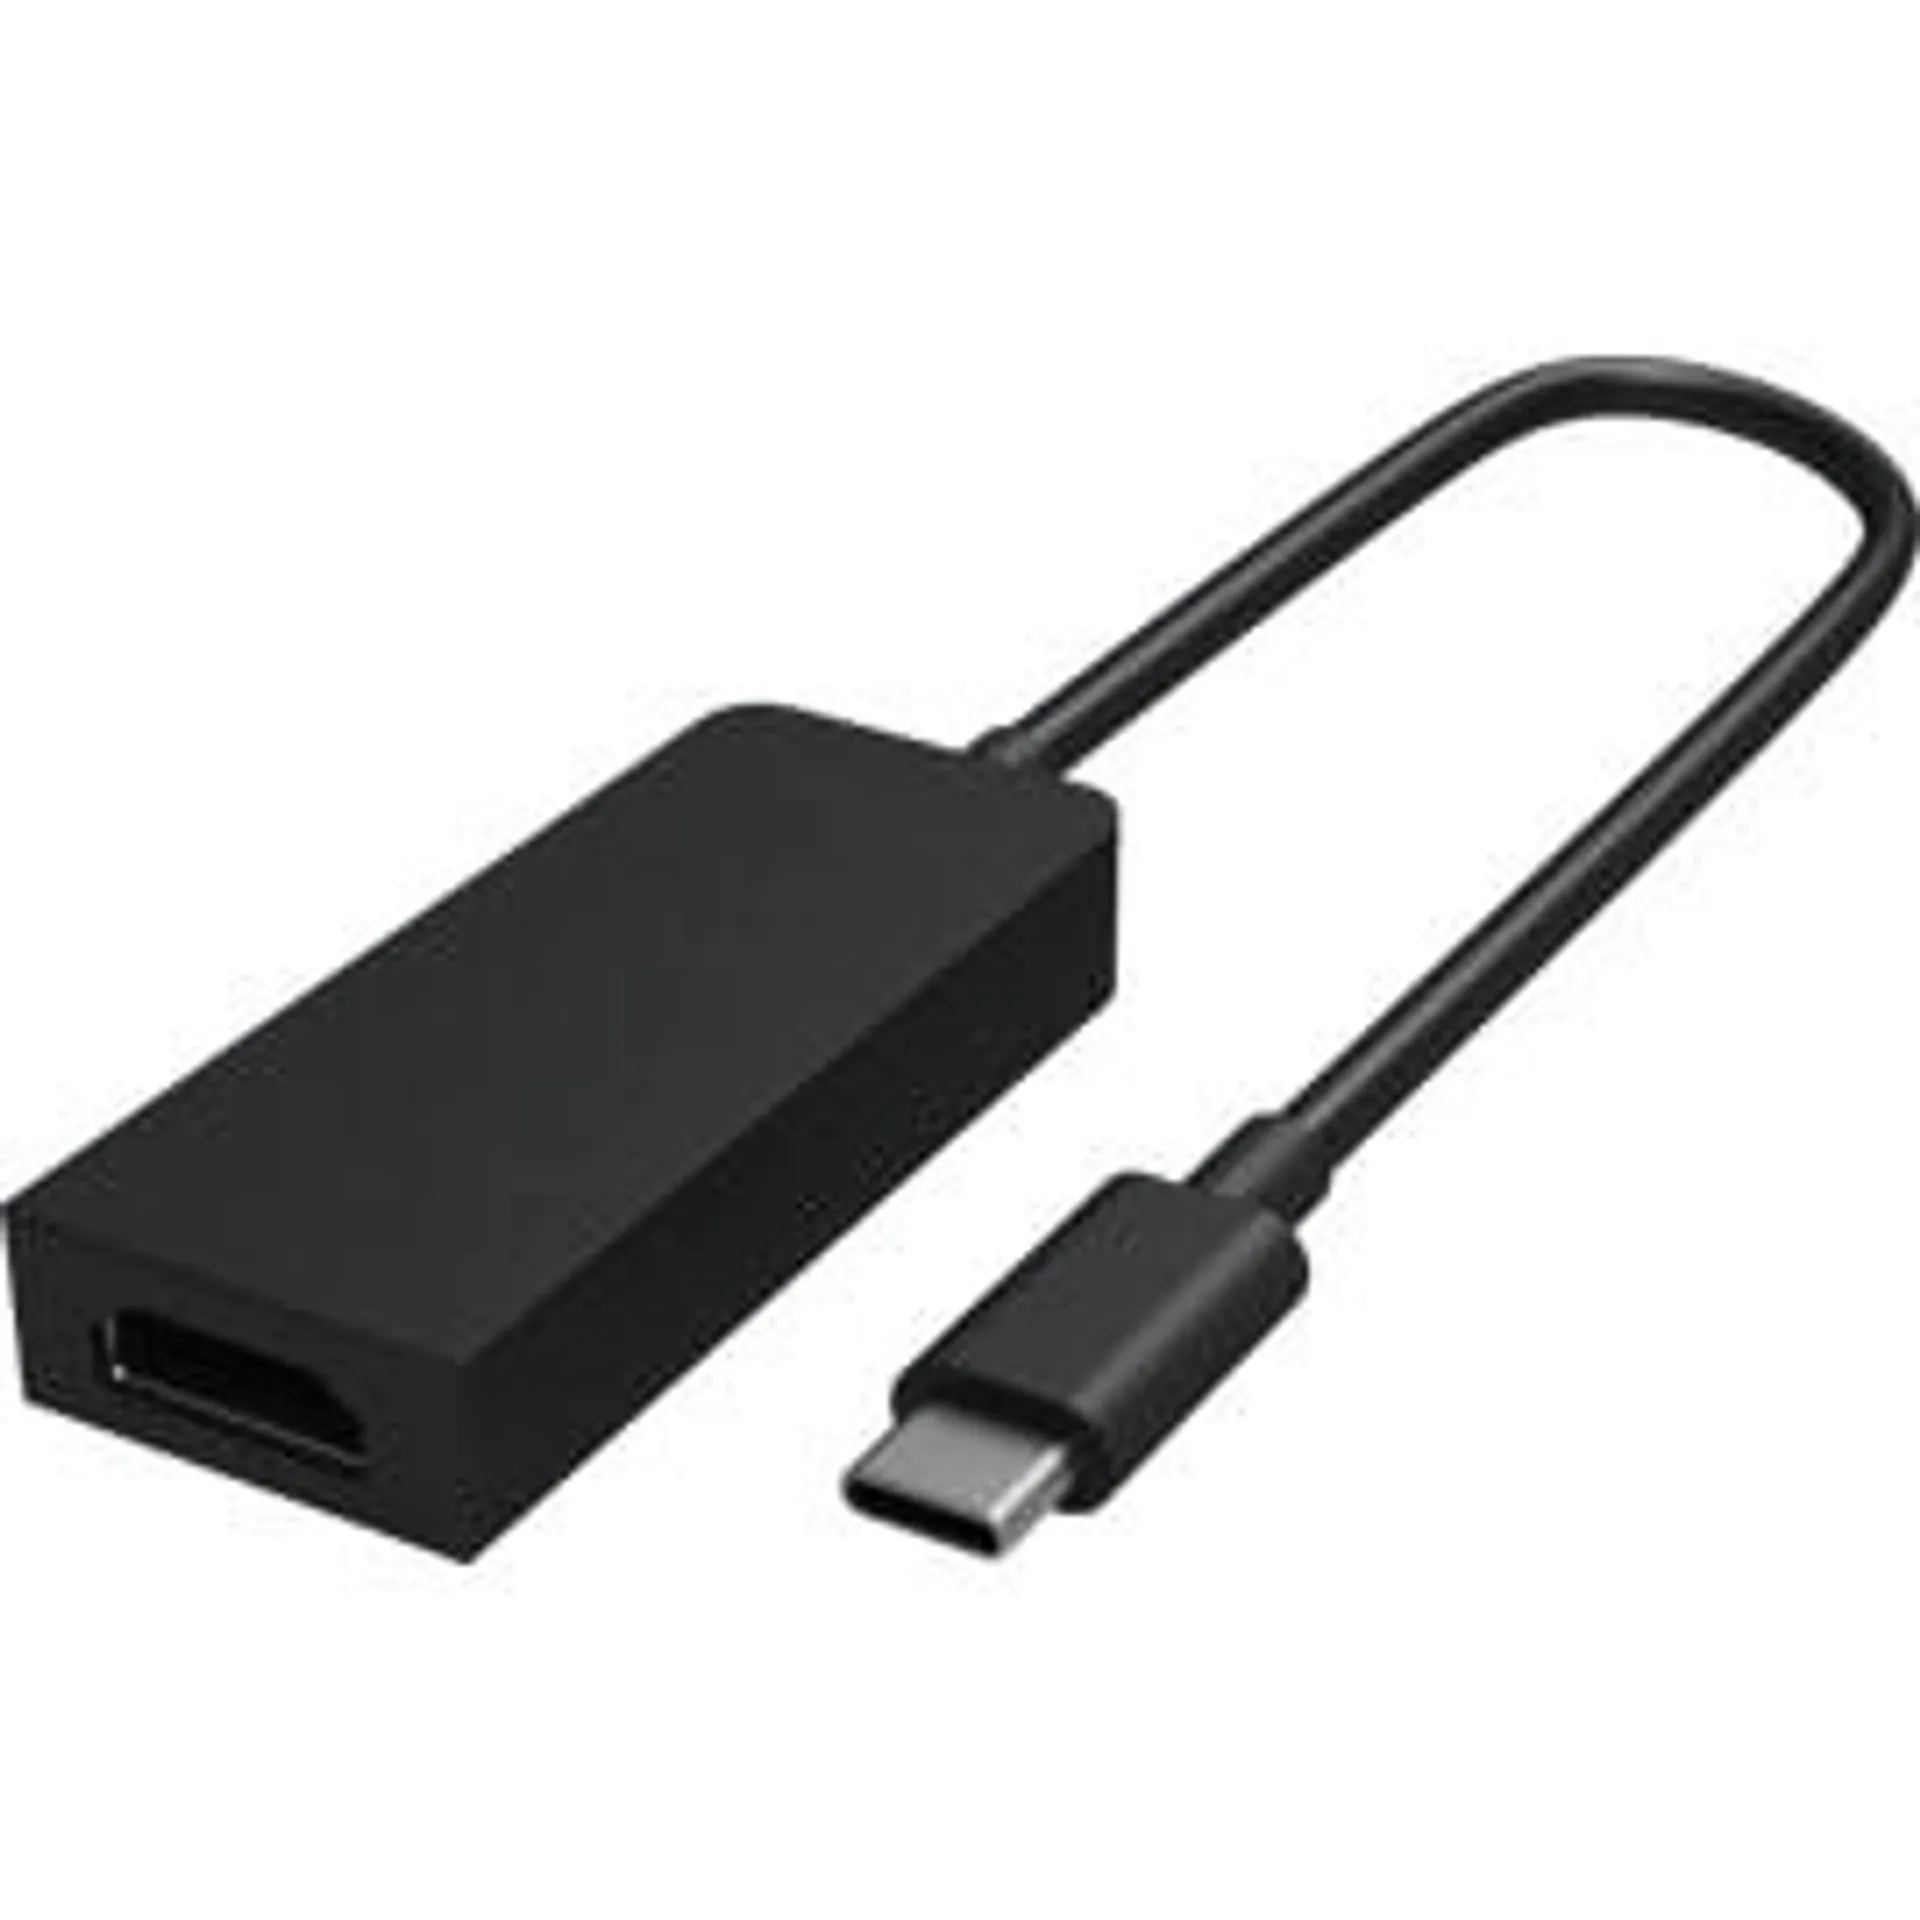 Surface USB-C to HDMI Adapter for Business